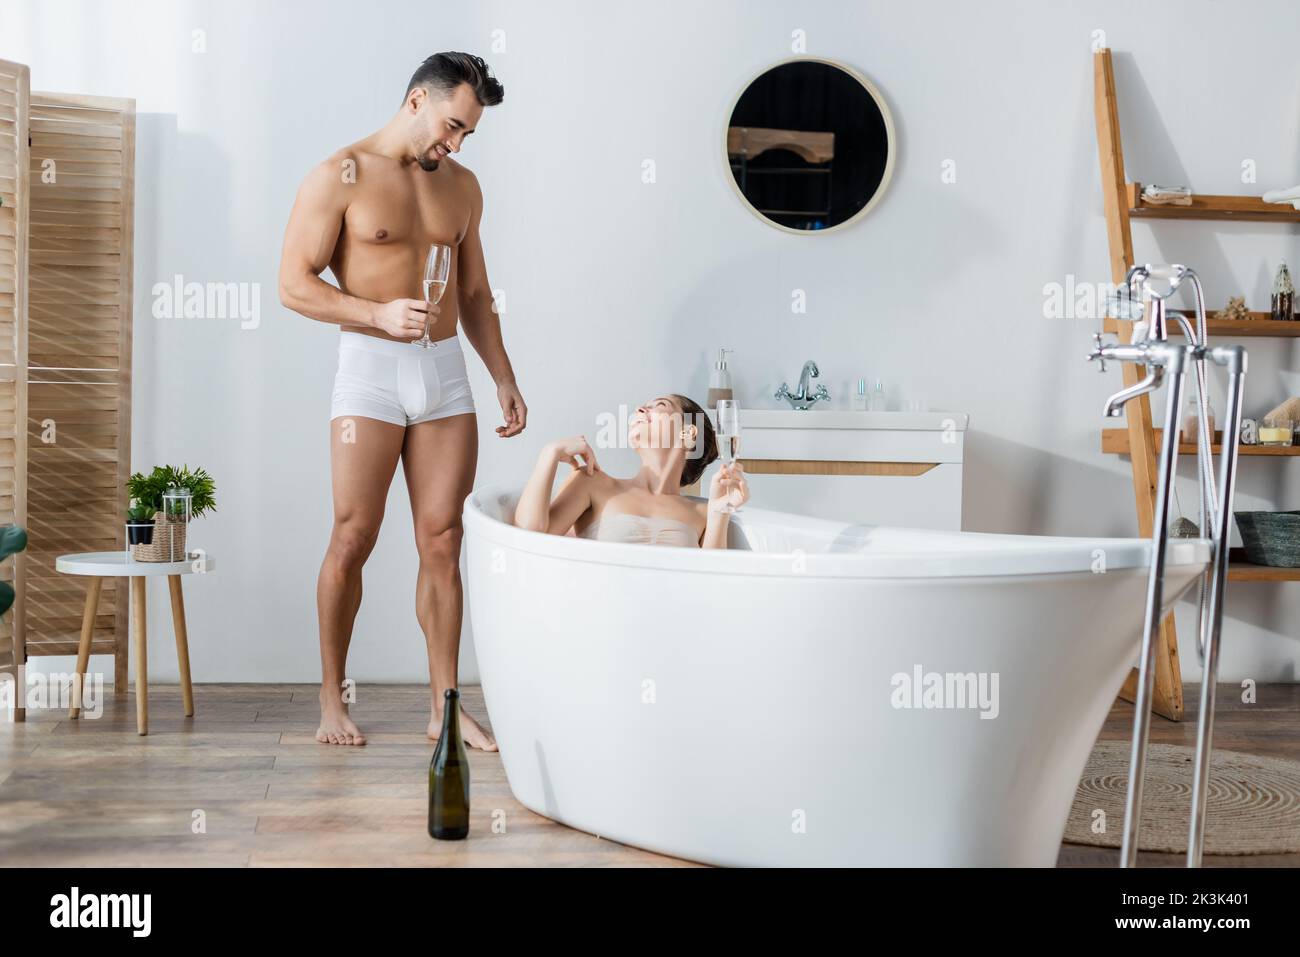 happy woman relaxing in bathtub and looking at boyfriend in underpants standing with champagne glass Stock Photo